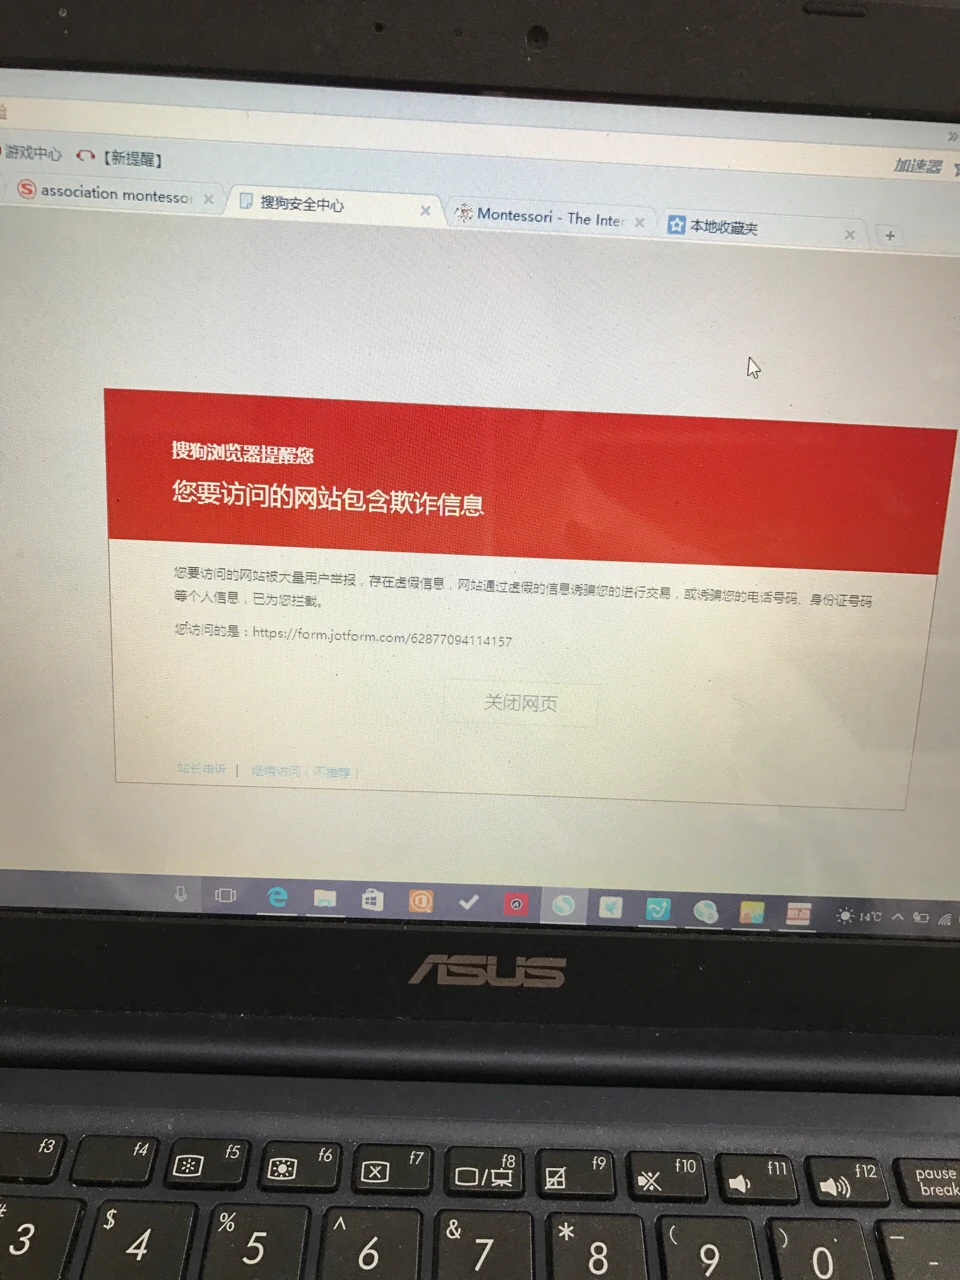 My form is blocked in China Image 1 Screenshot 20